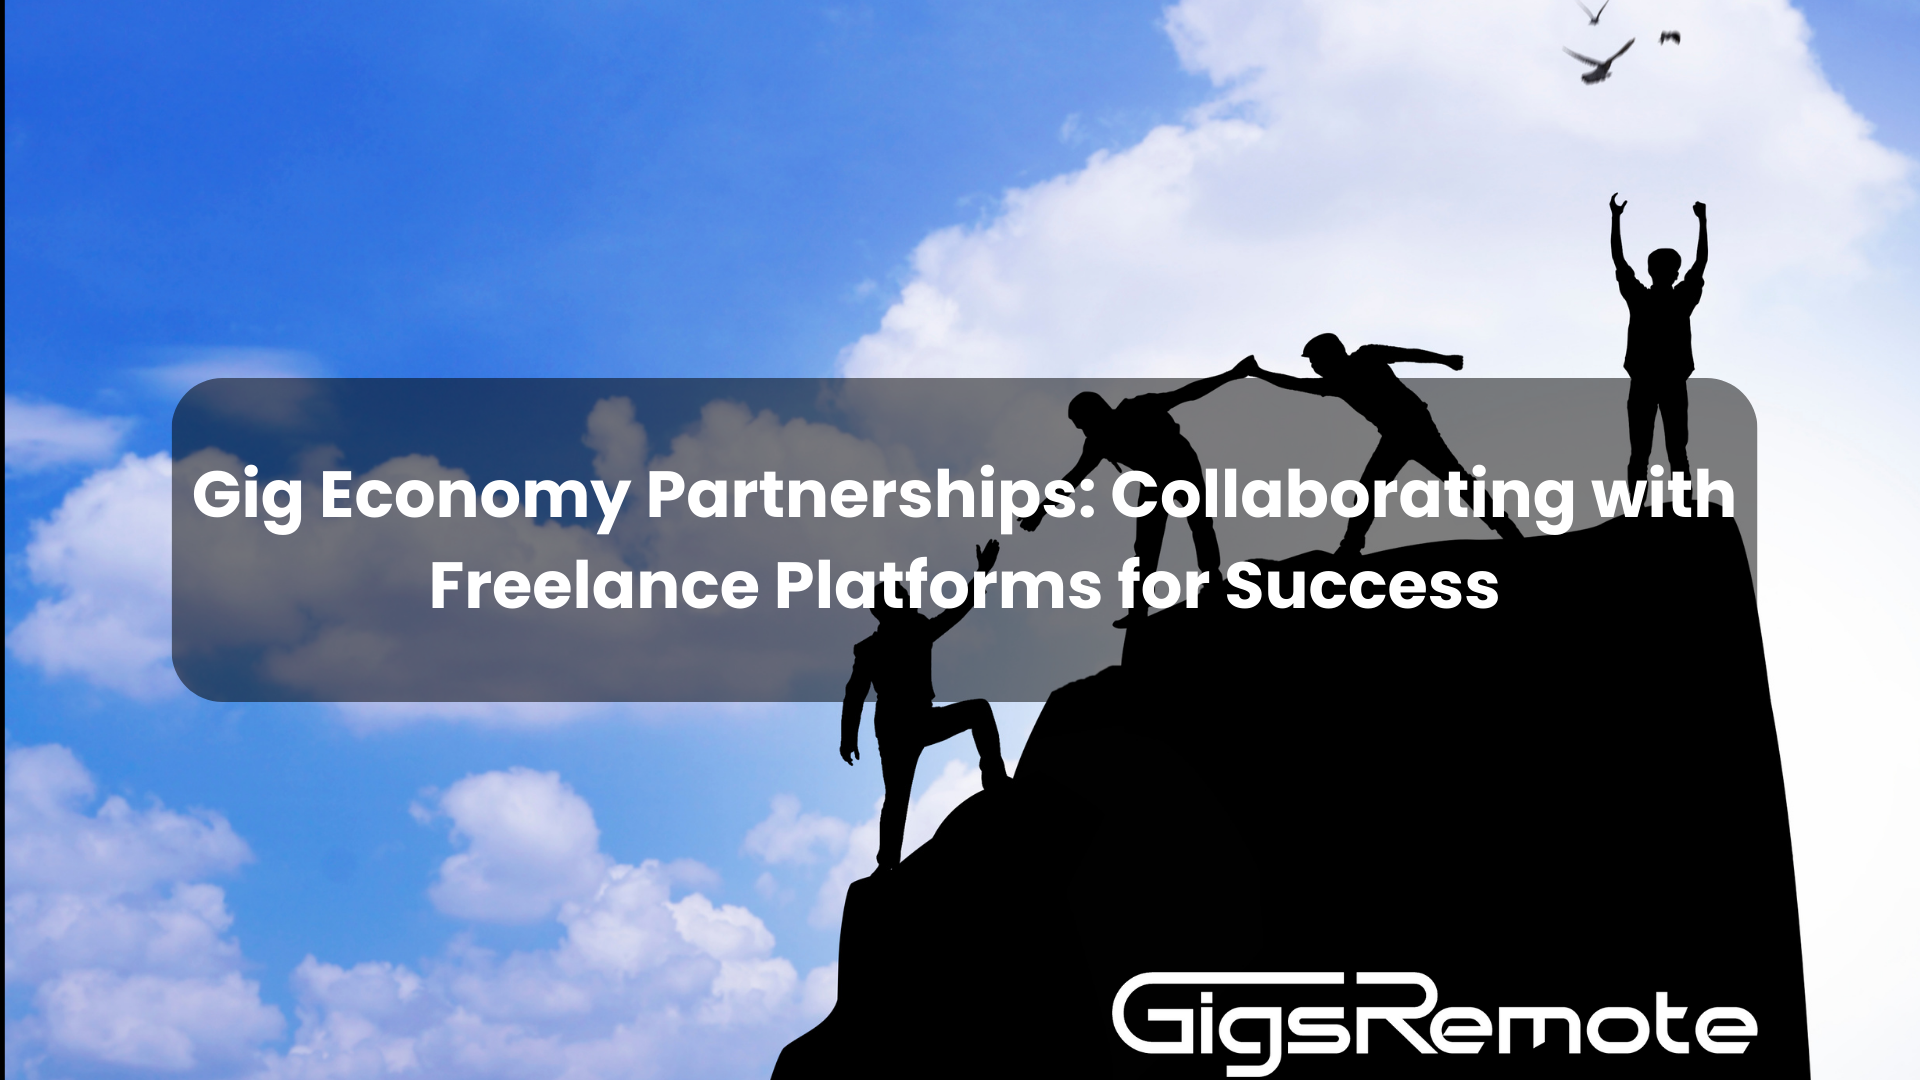 Gig Economy Partnerships Collaborating with Gig Platforms for Success